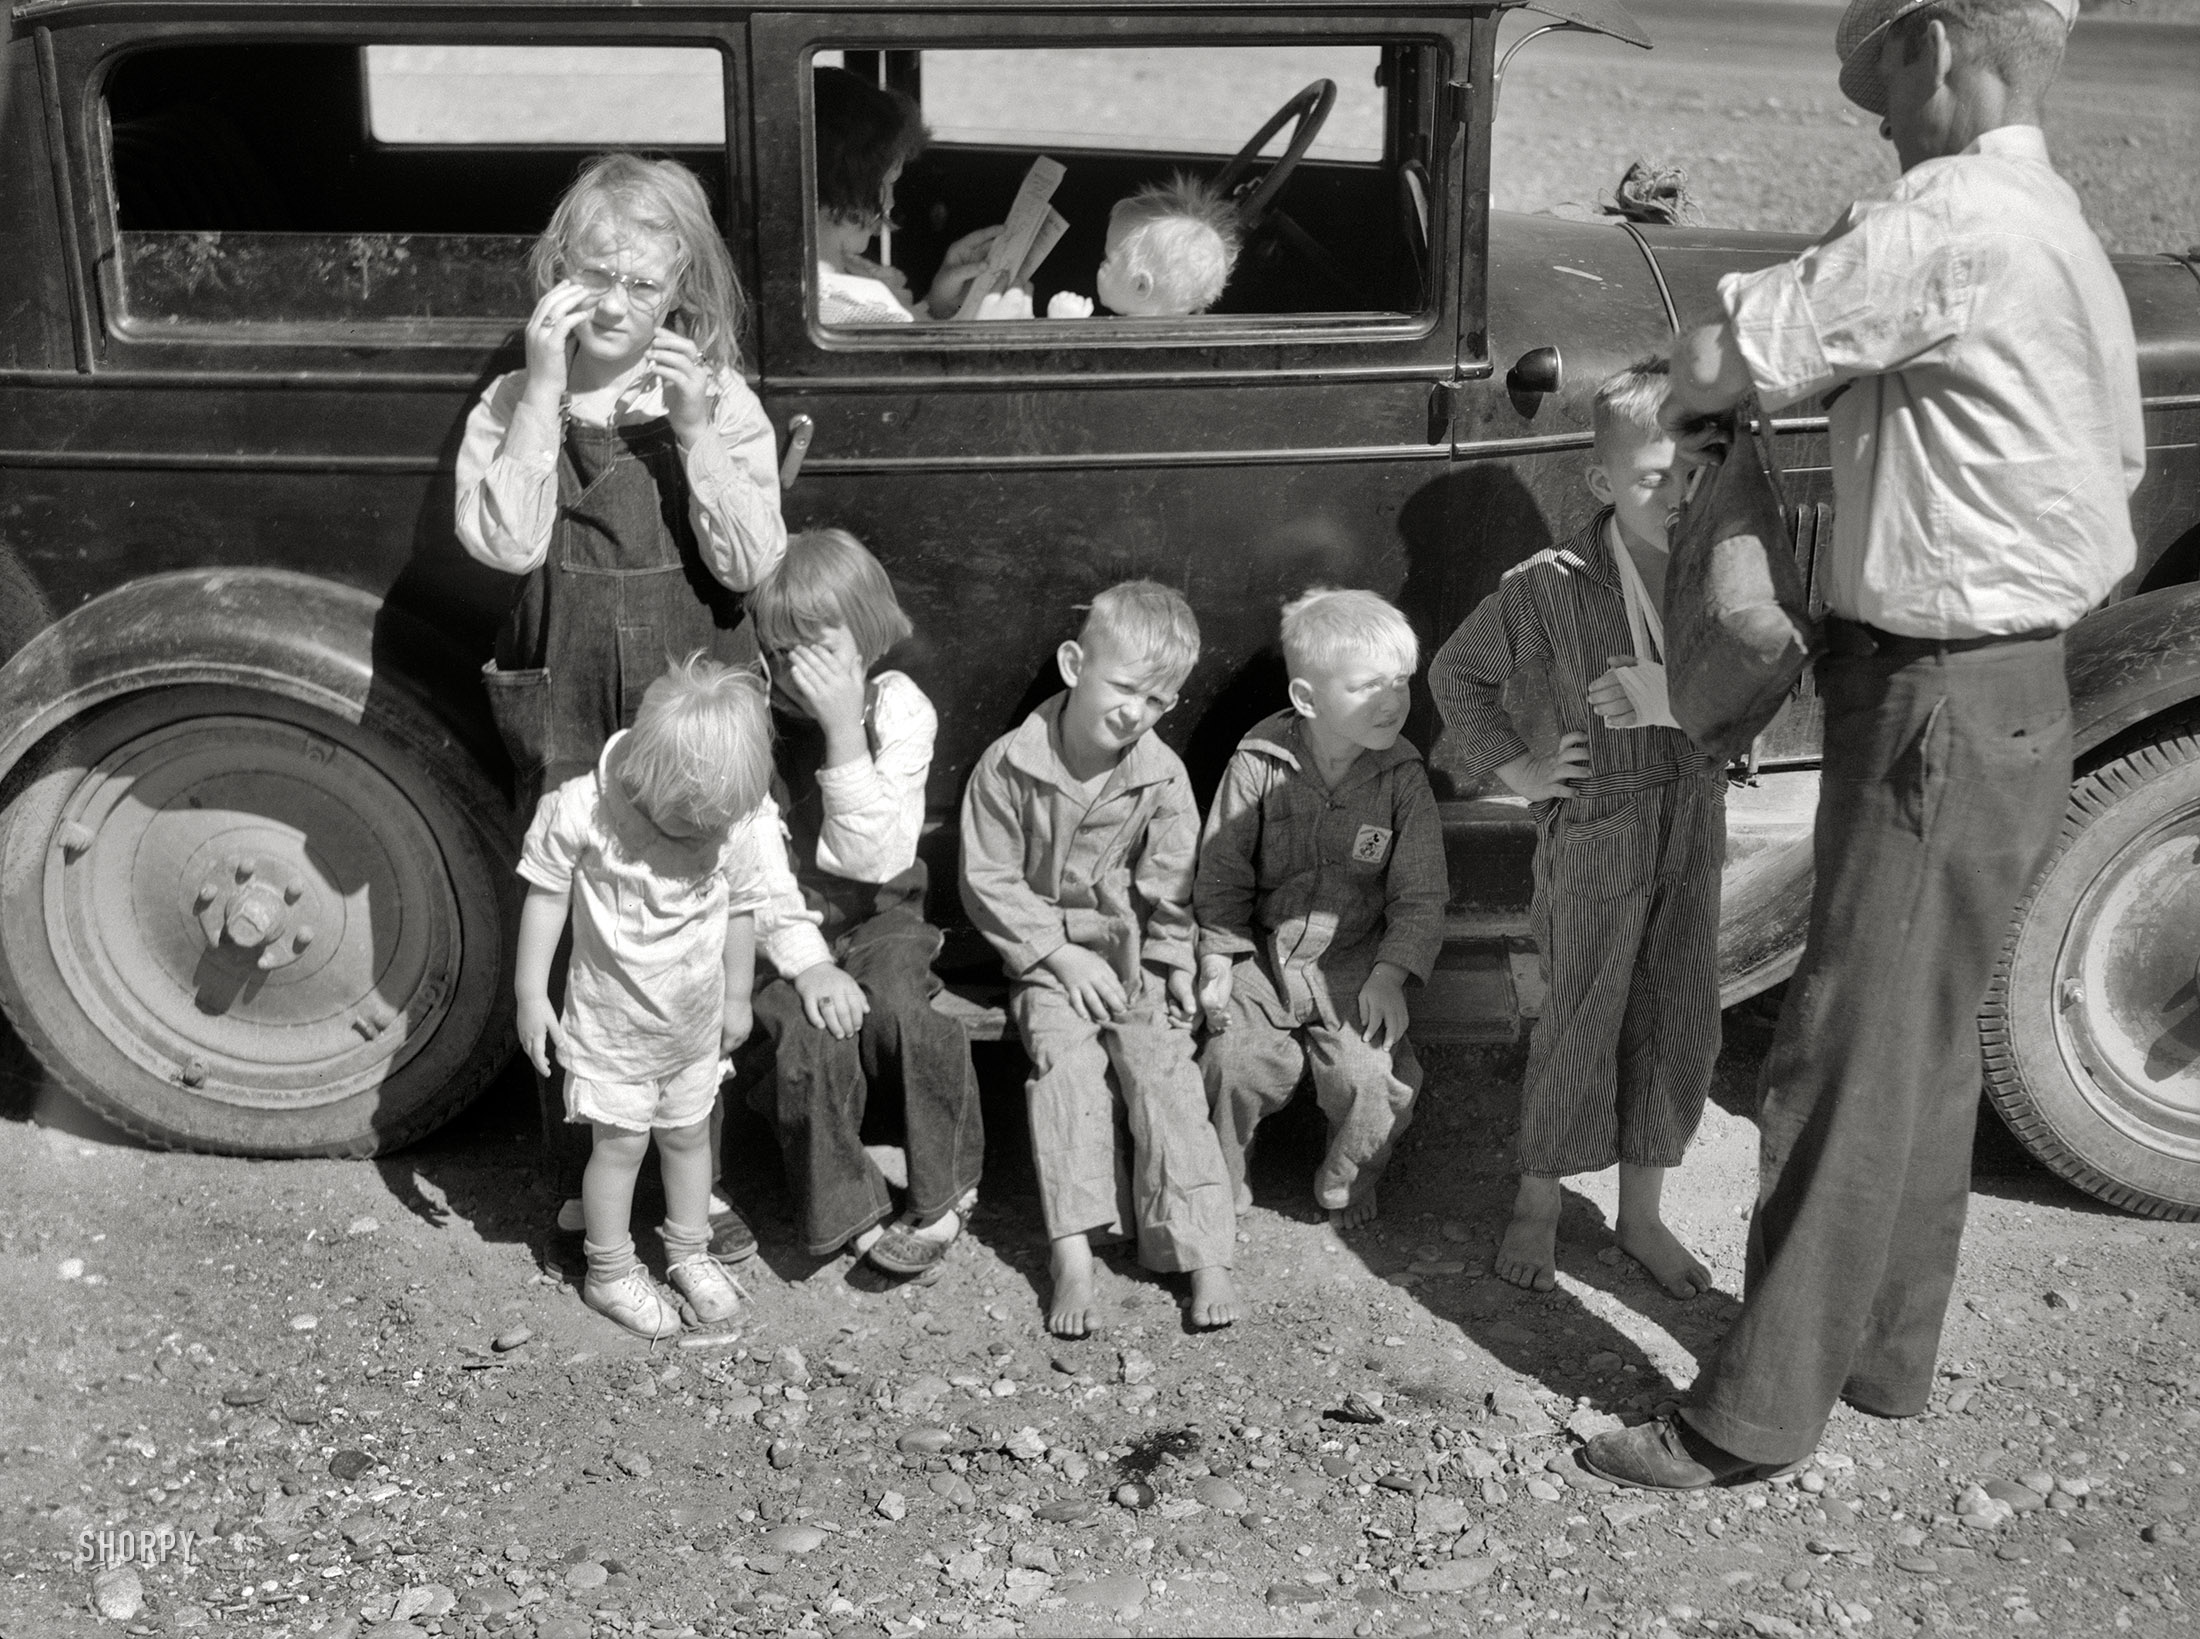 July 1936. "Drought refugees from Bowman, North Dakota, in Montana." En route to Oregon or Washington. Medium-format nitrate negative by Arthur Rothstein for the Resettlement Administration. View full size.